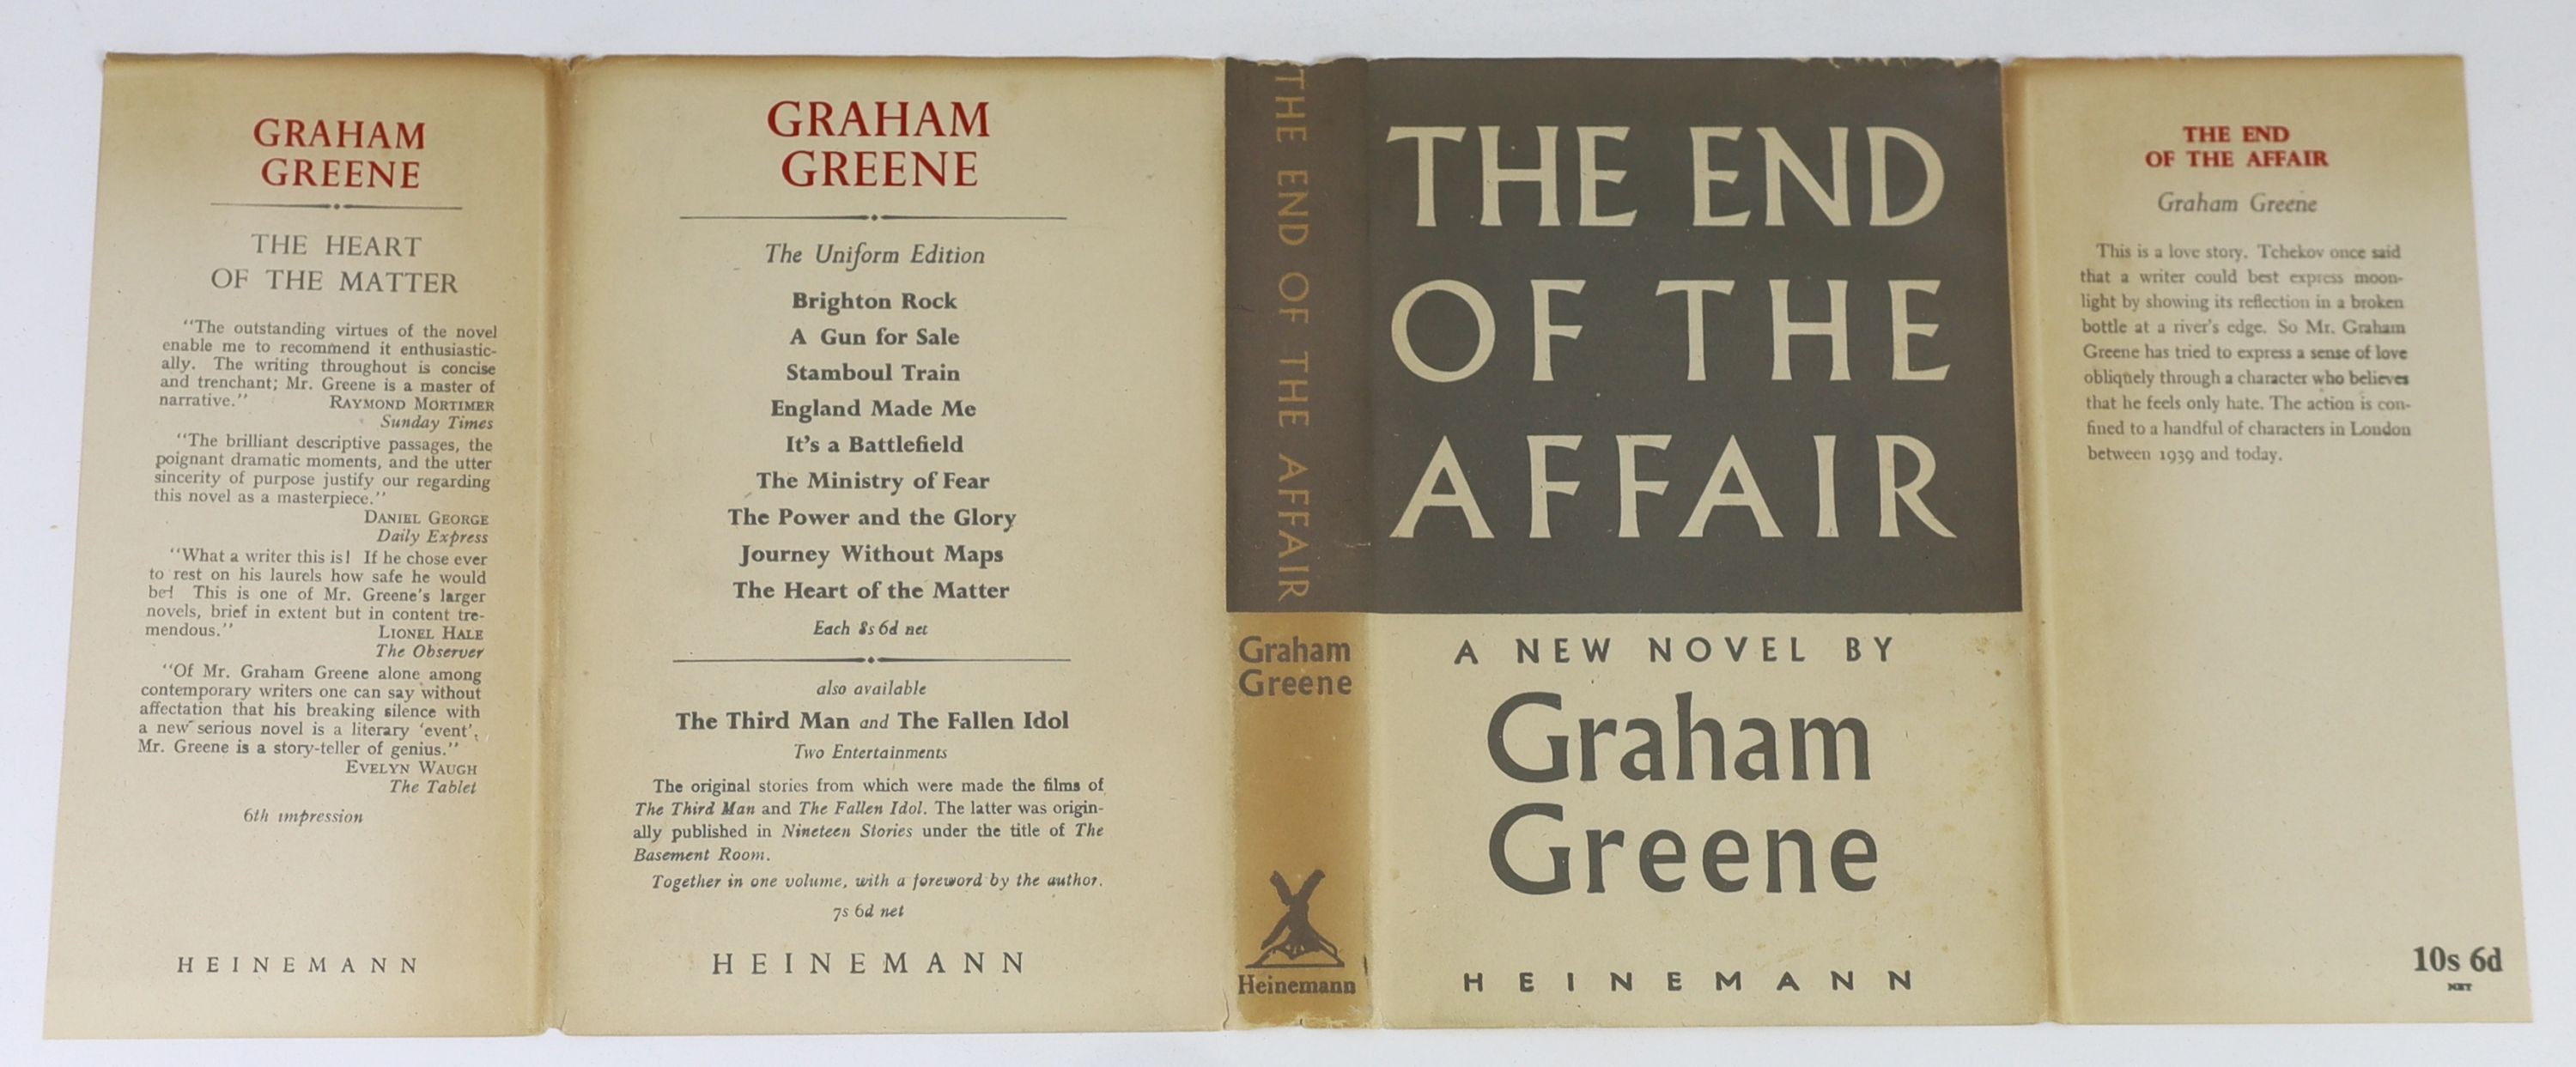 Greene, Graham - The End of the Affair, 1st edition, in unclipped d/j, William Heinemann, London, 1951